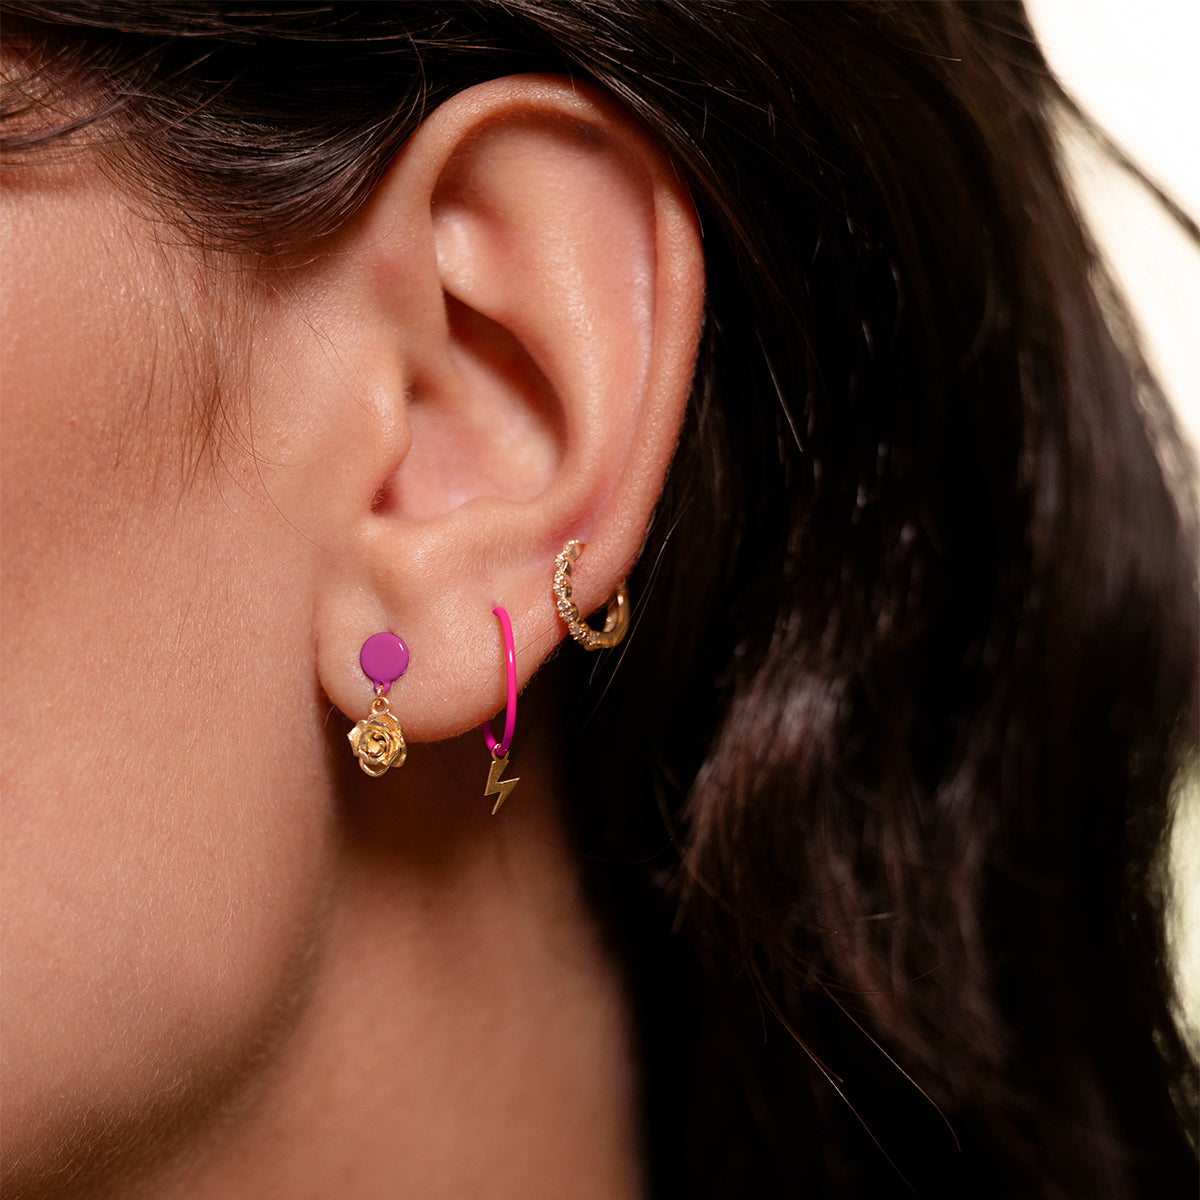 Earrings - Single earring with Lightning and painted hoop - ORO18KT - 4 | Rue des Mille